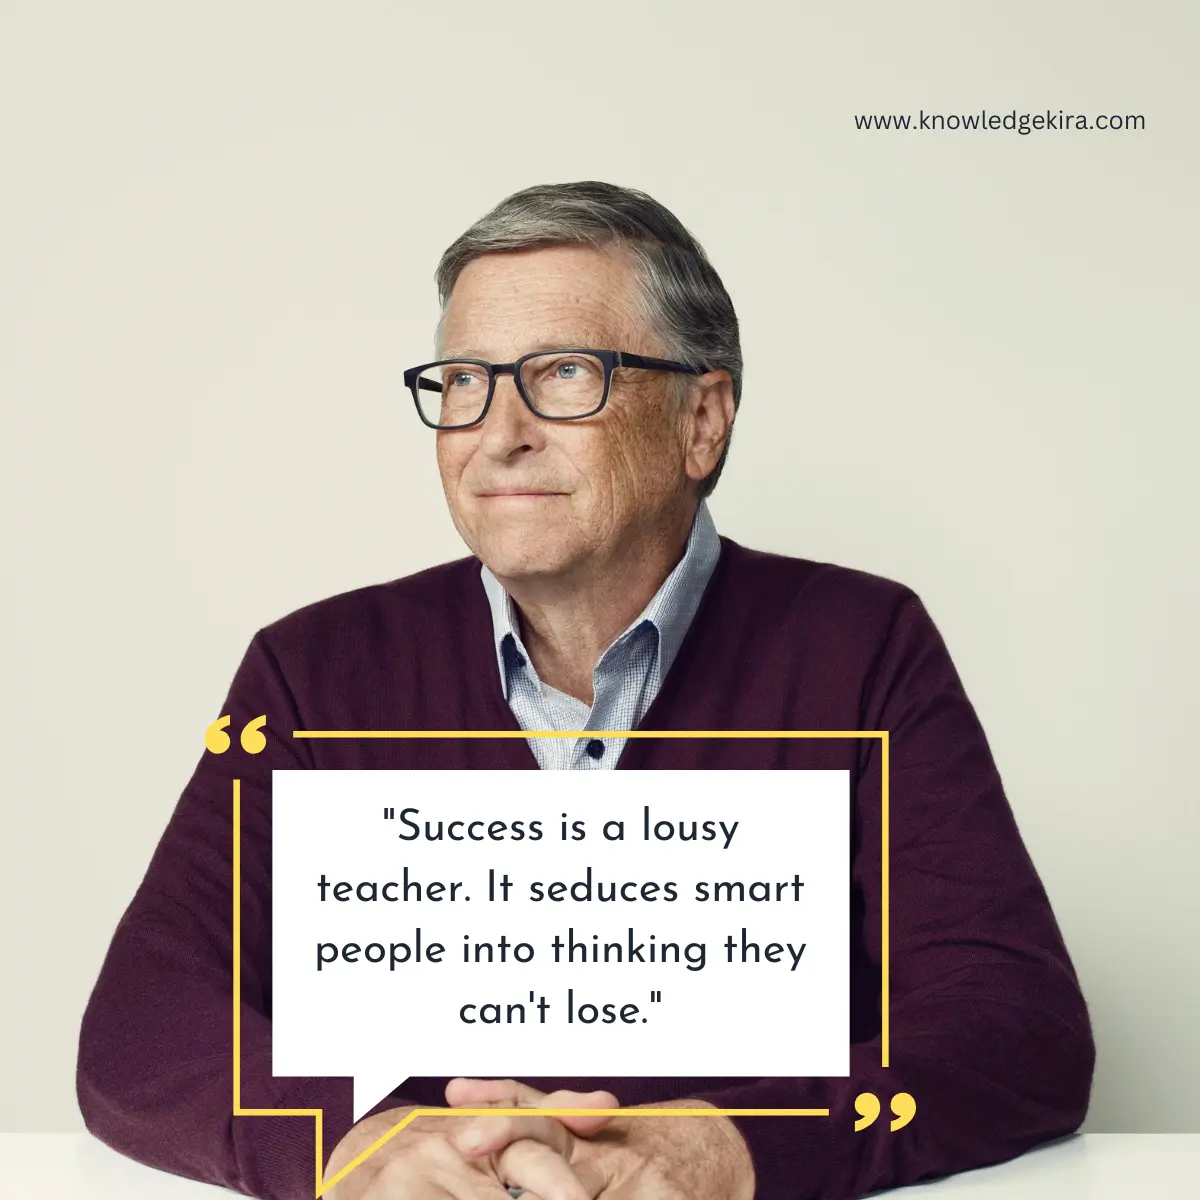 Bill Gates Quotes: 50 Most Famous Quotes By Bill Gates